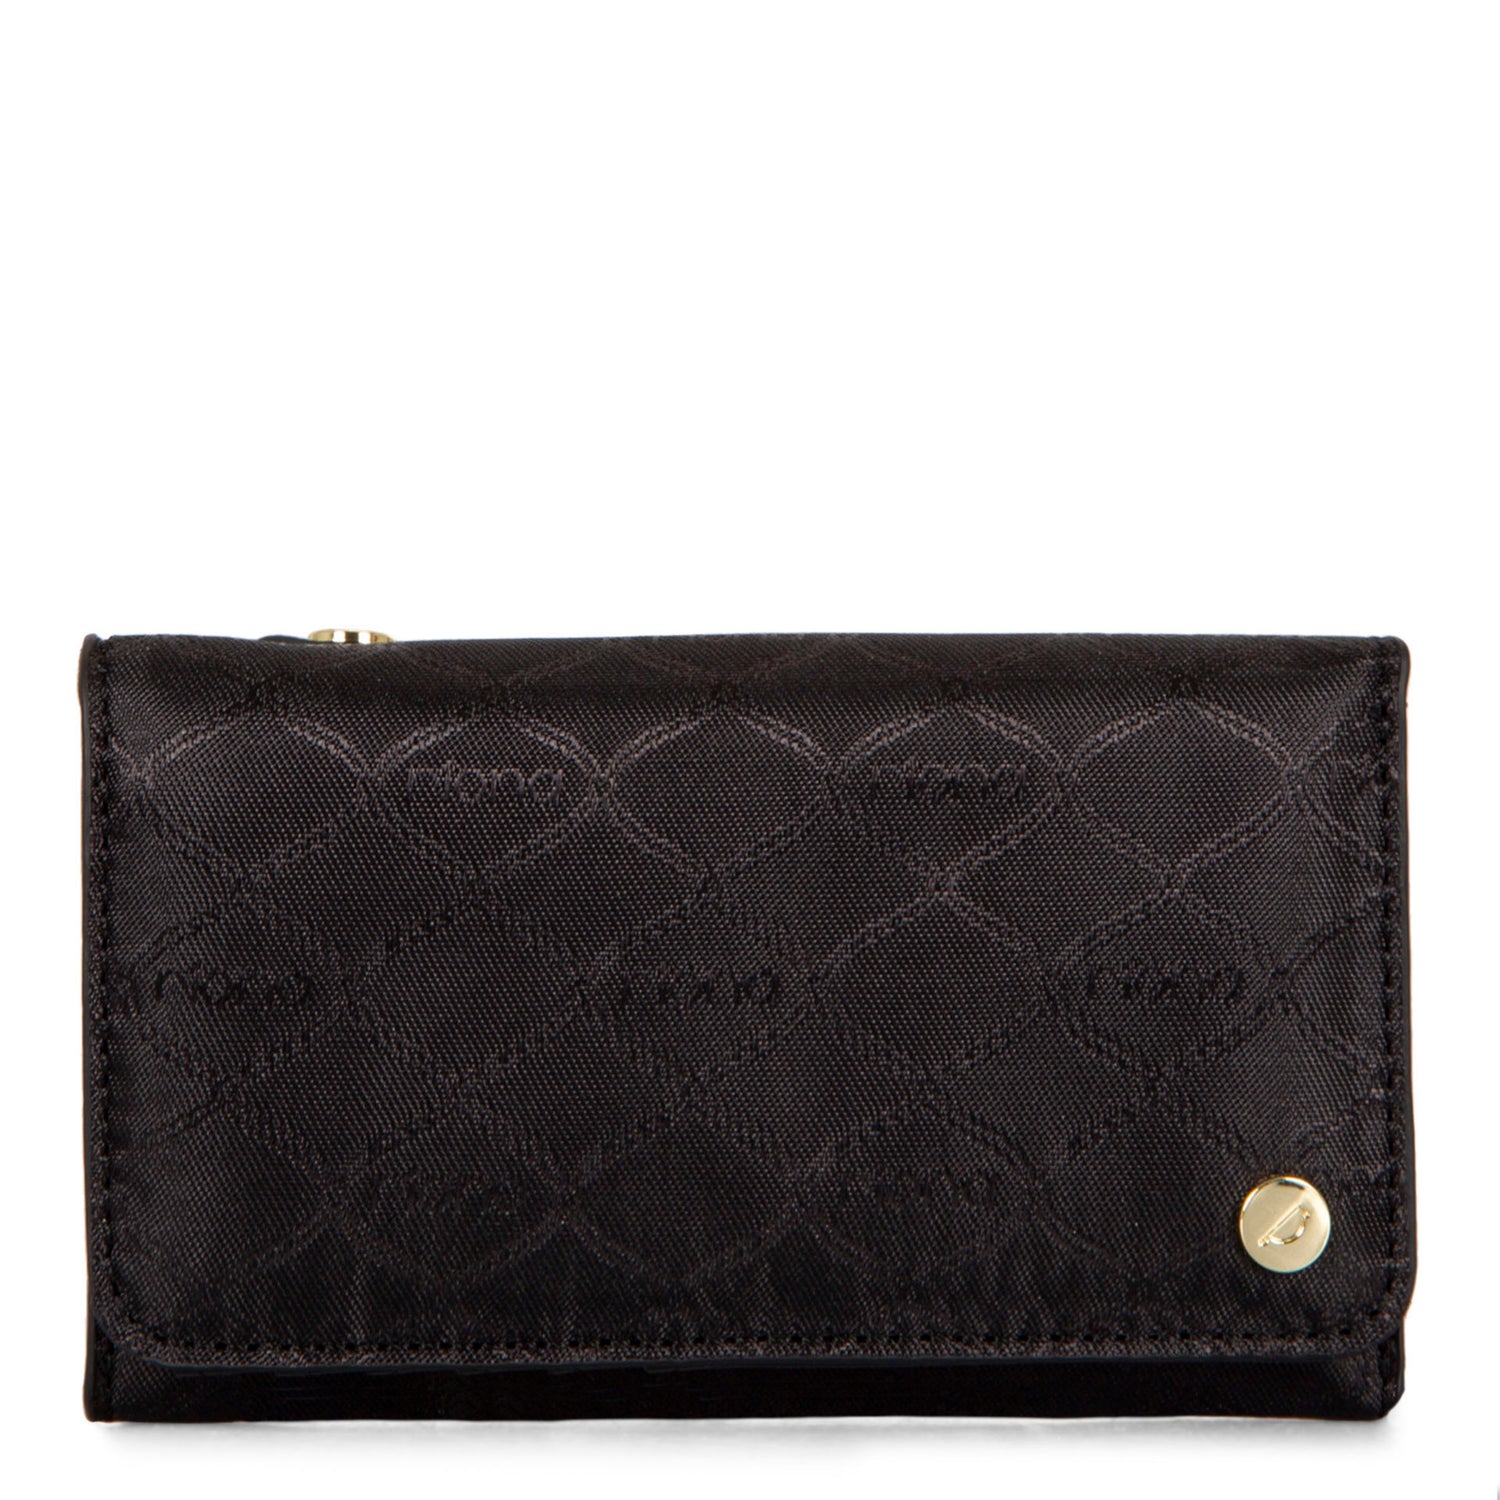 Signature RFID Trifold Wallet